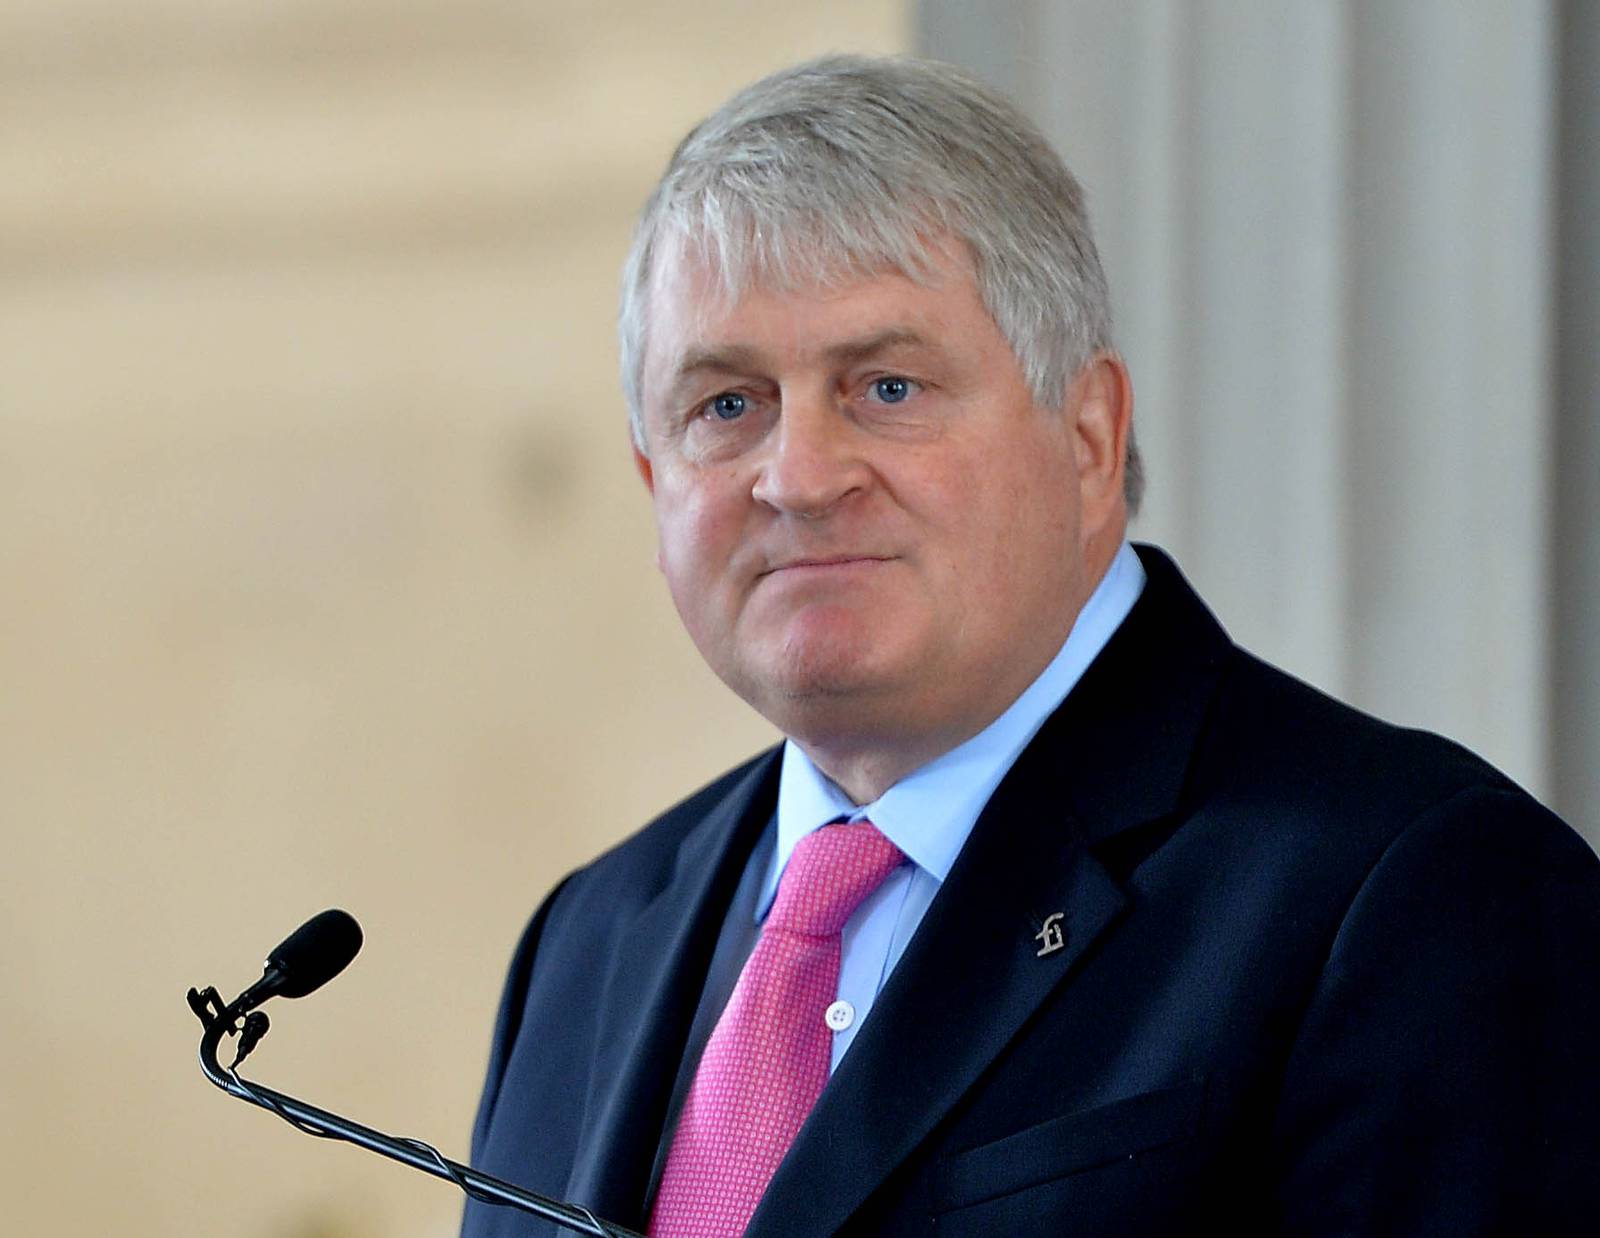 03/05/2013 - NEWS -   Denis O Brien speaking at the Front line Defendersin City Hall .
Photo: David Sleator/THE IRISH TIMES
Stock, General View, GV, Web